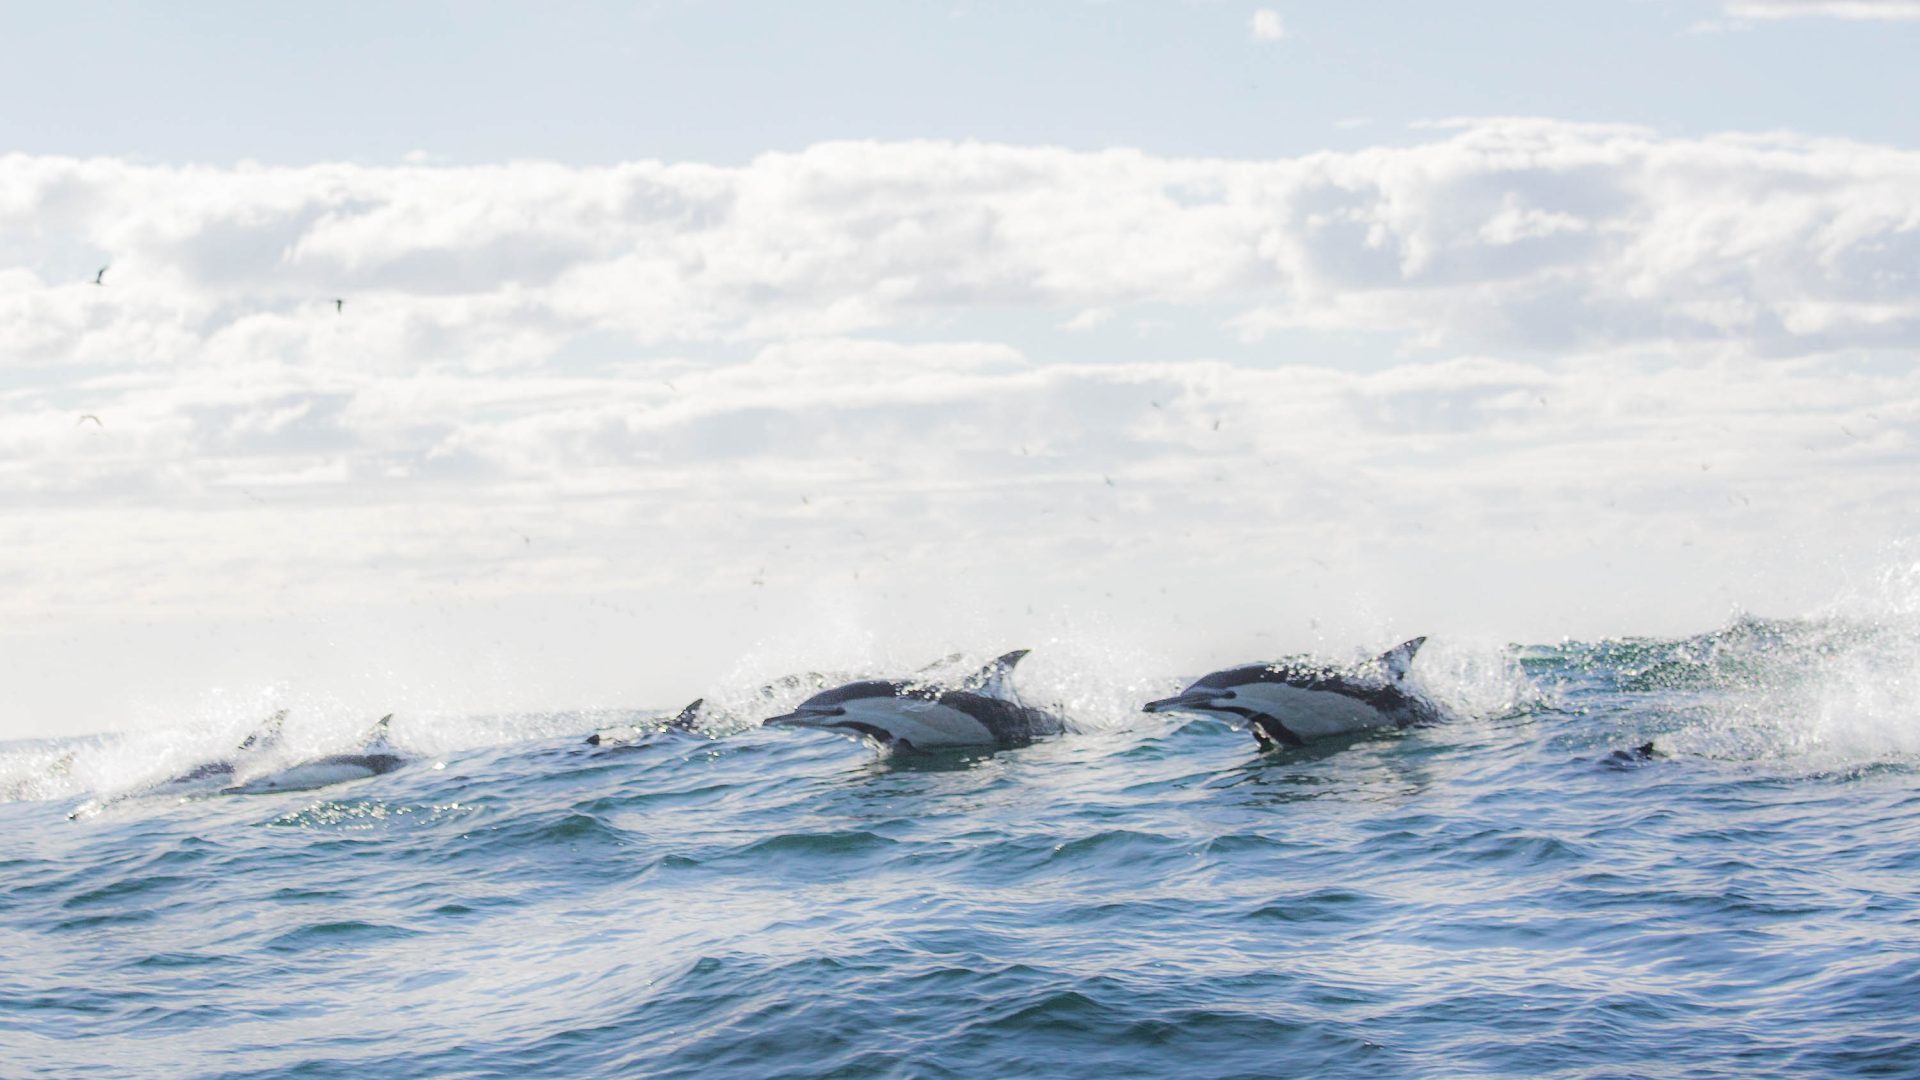 Dolphins jump out of the water where the sardines are.